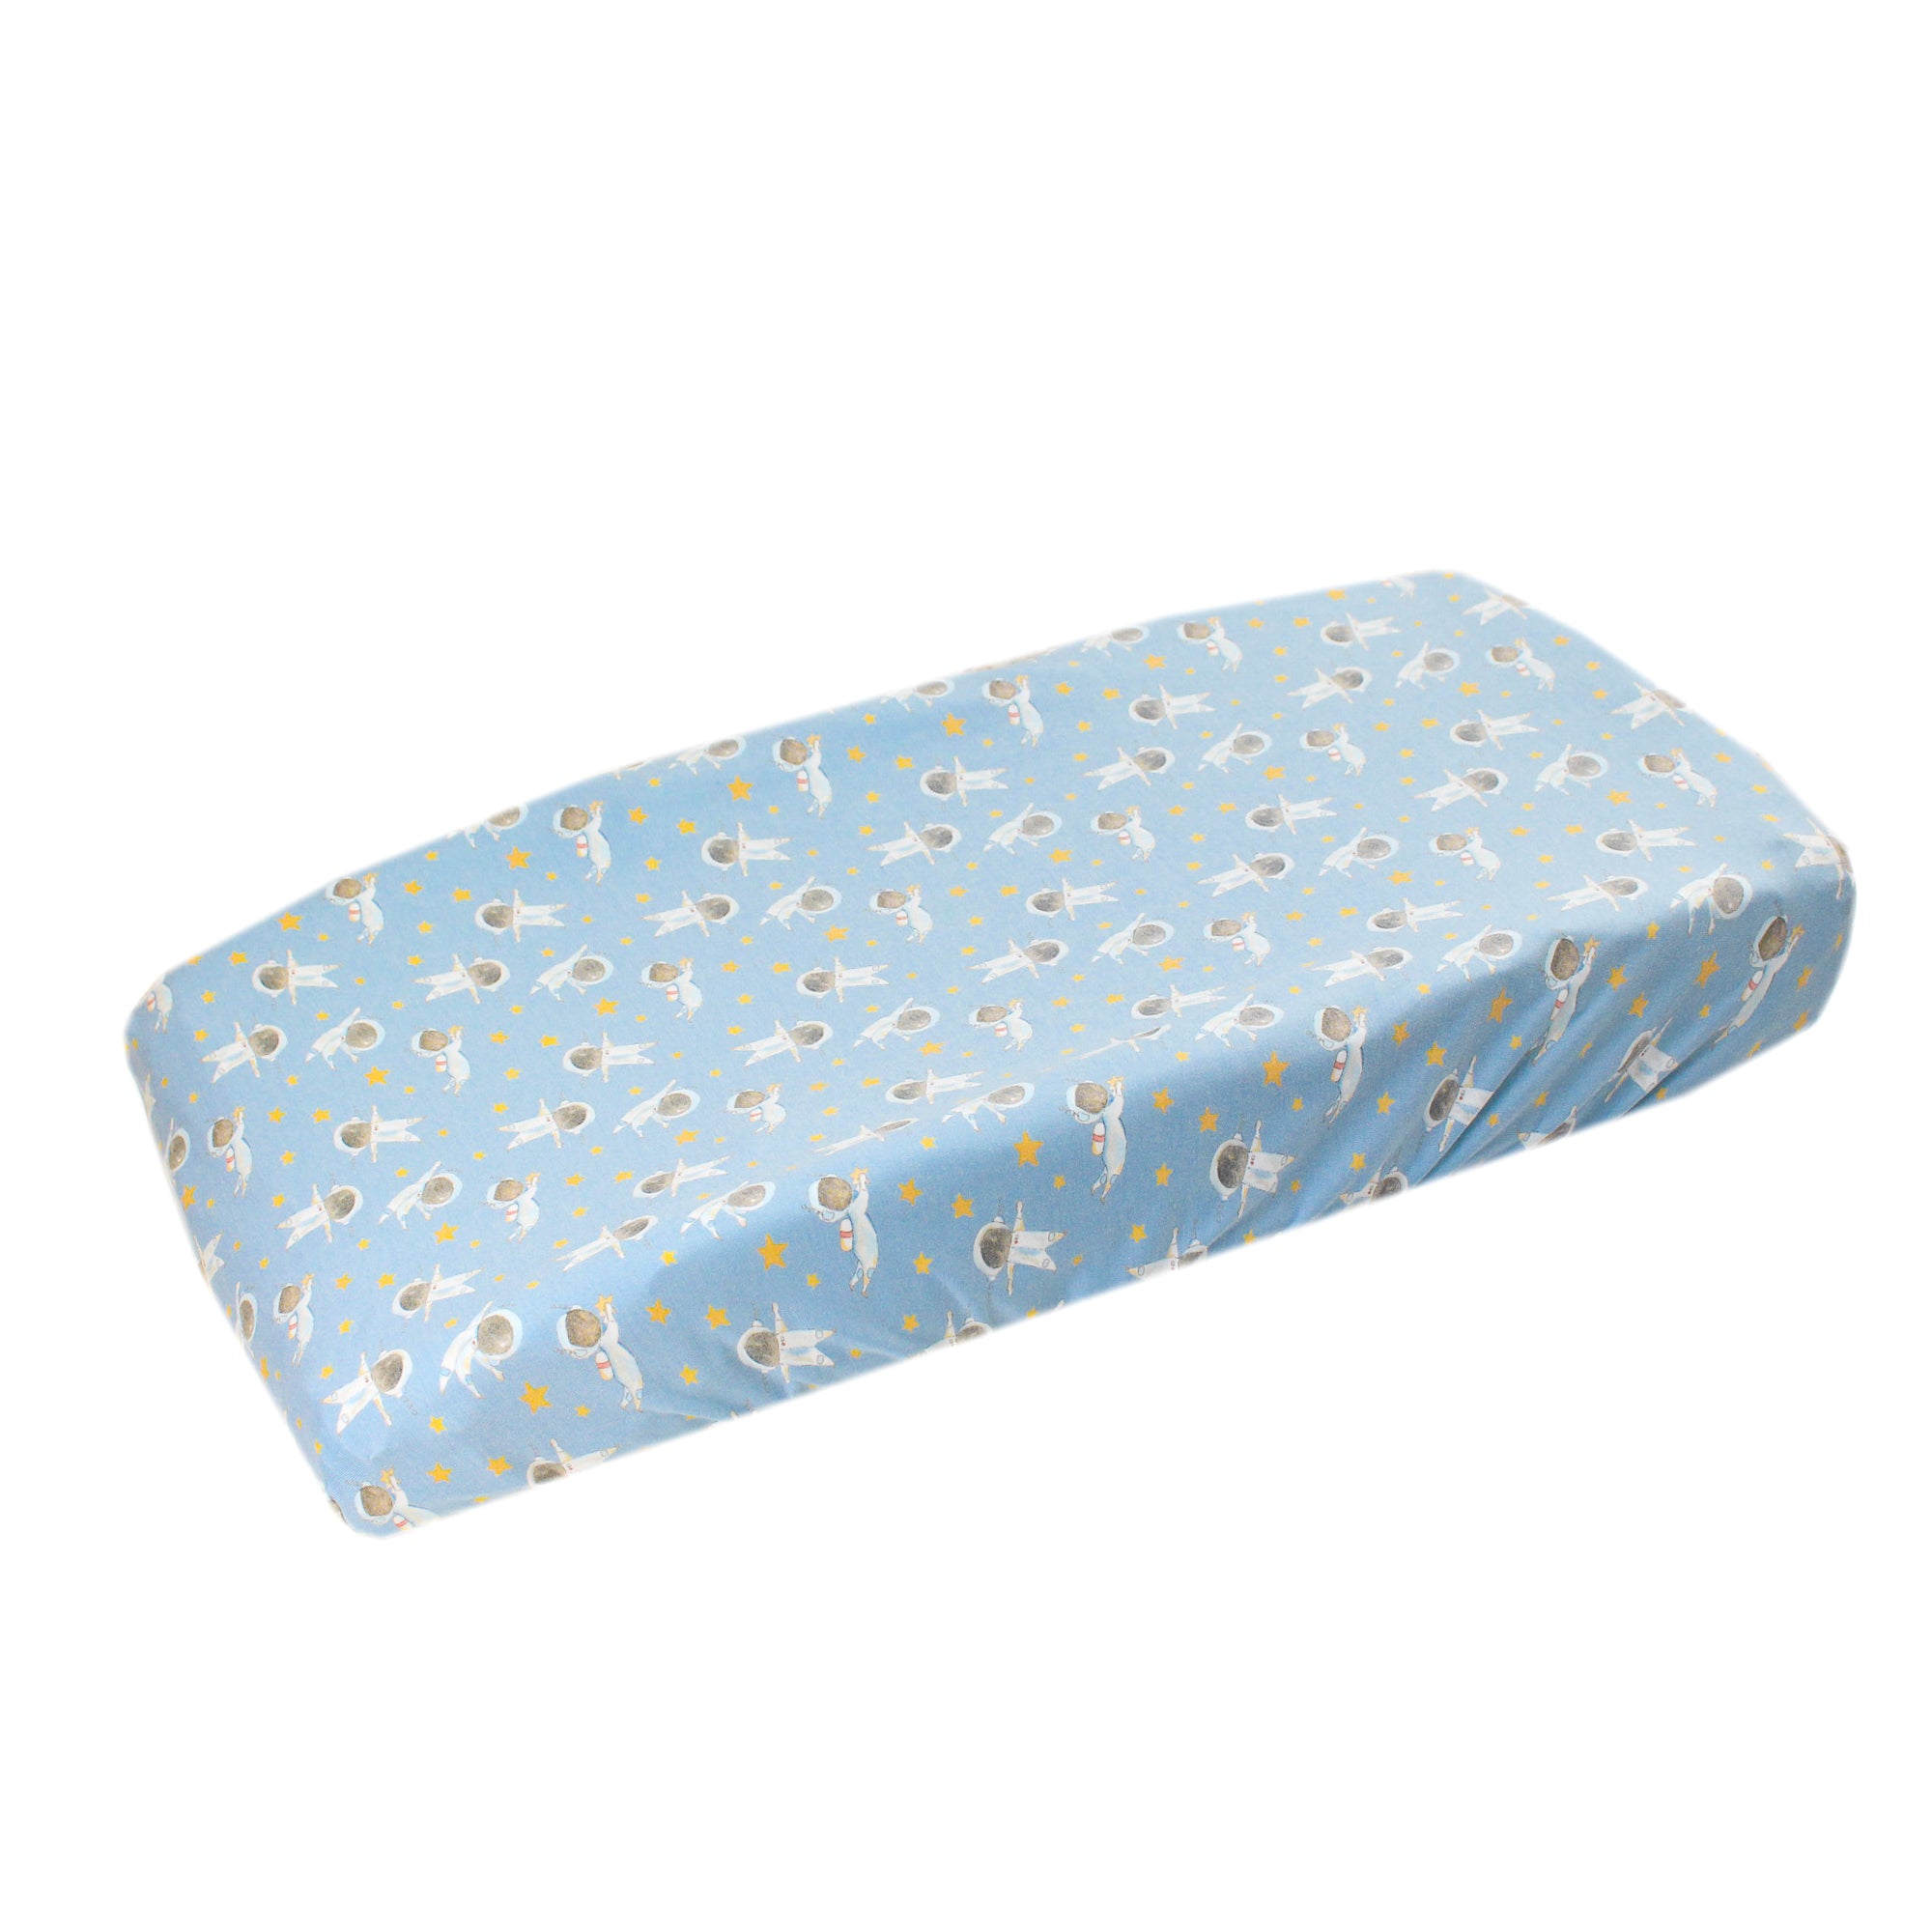 Premium Knit Diaper Changing Pad Cover - Neil